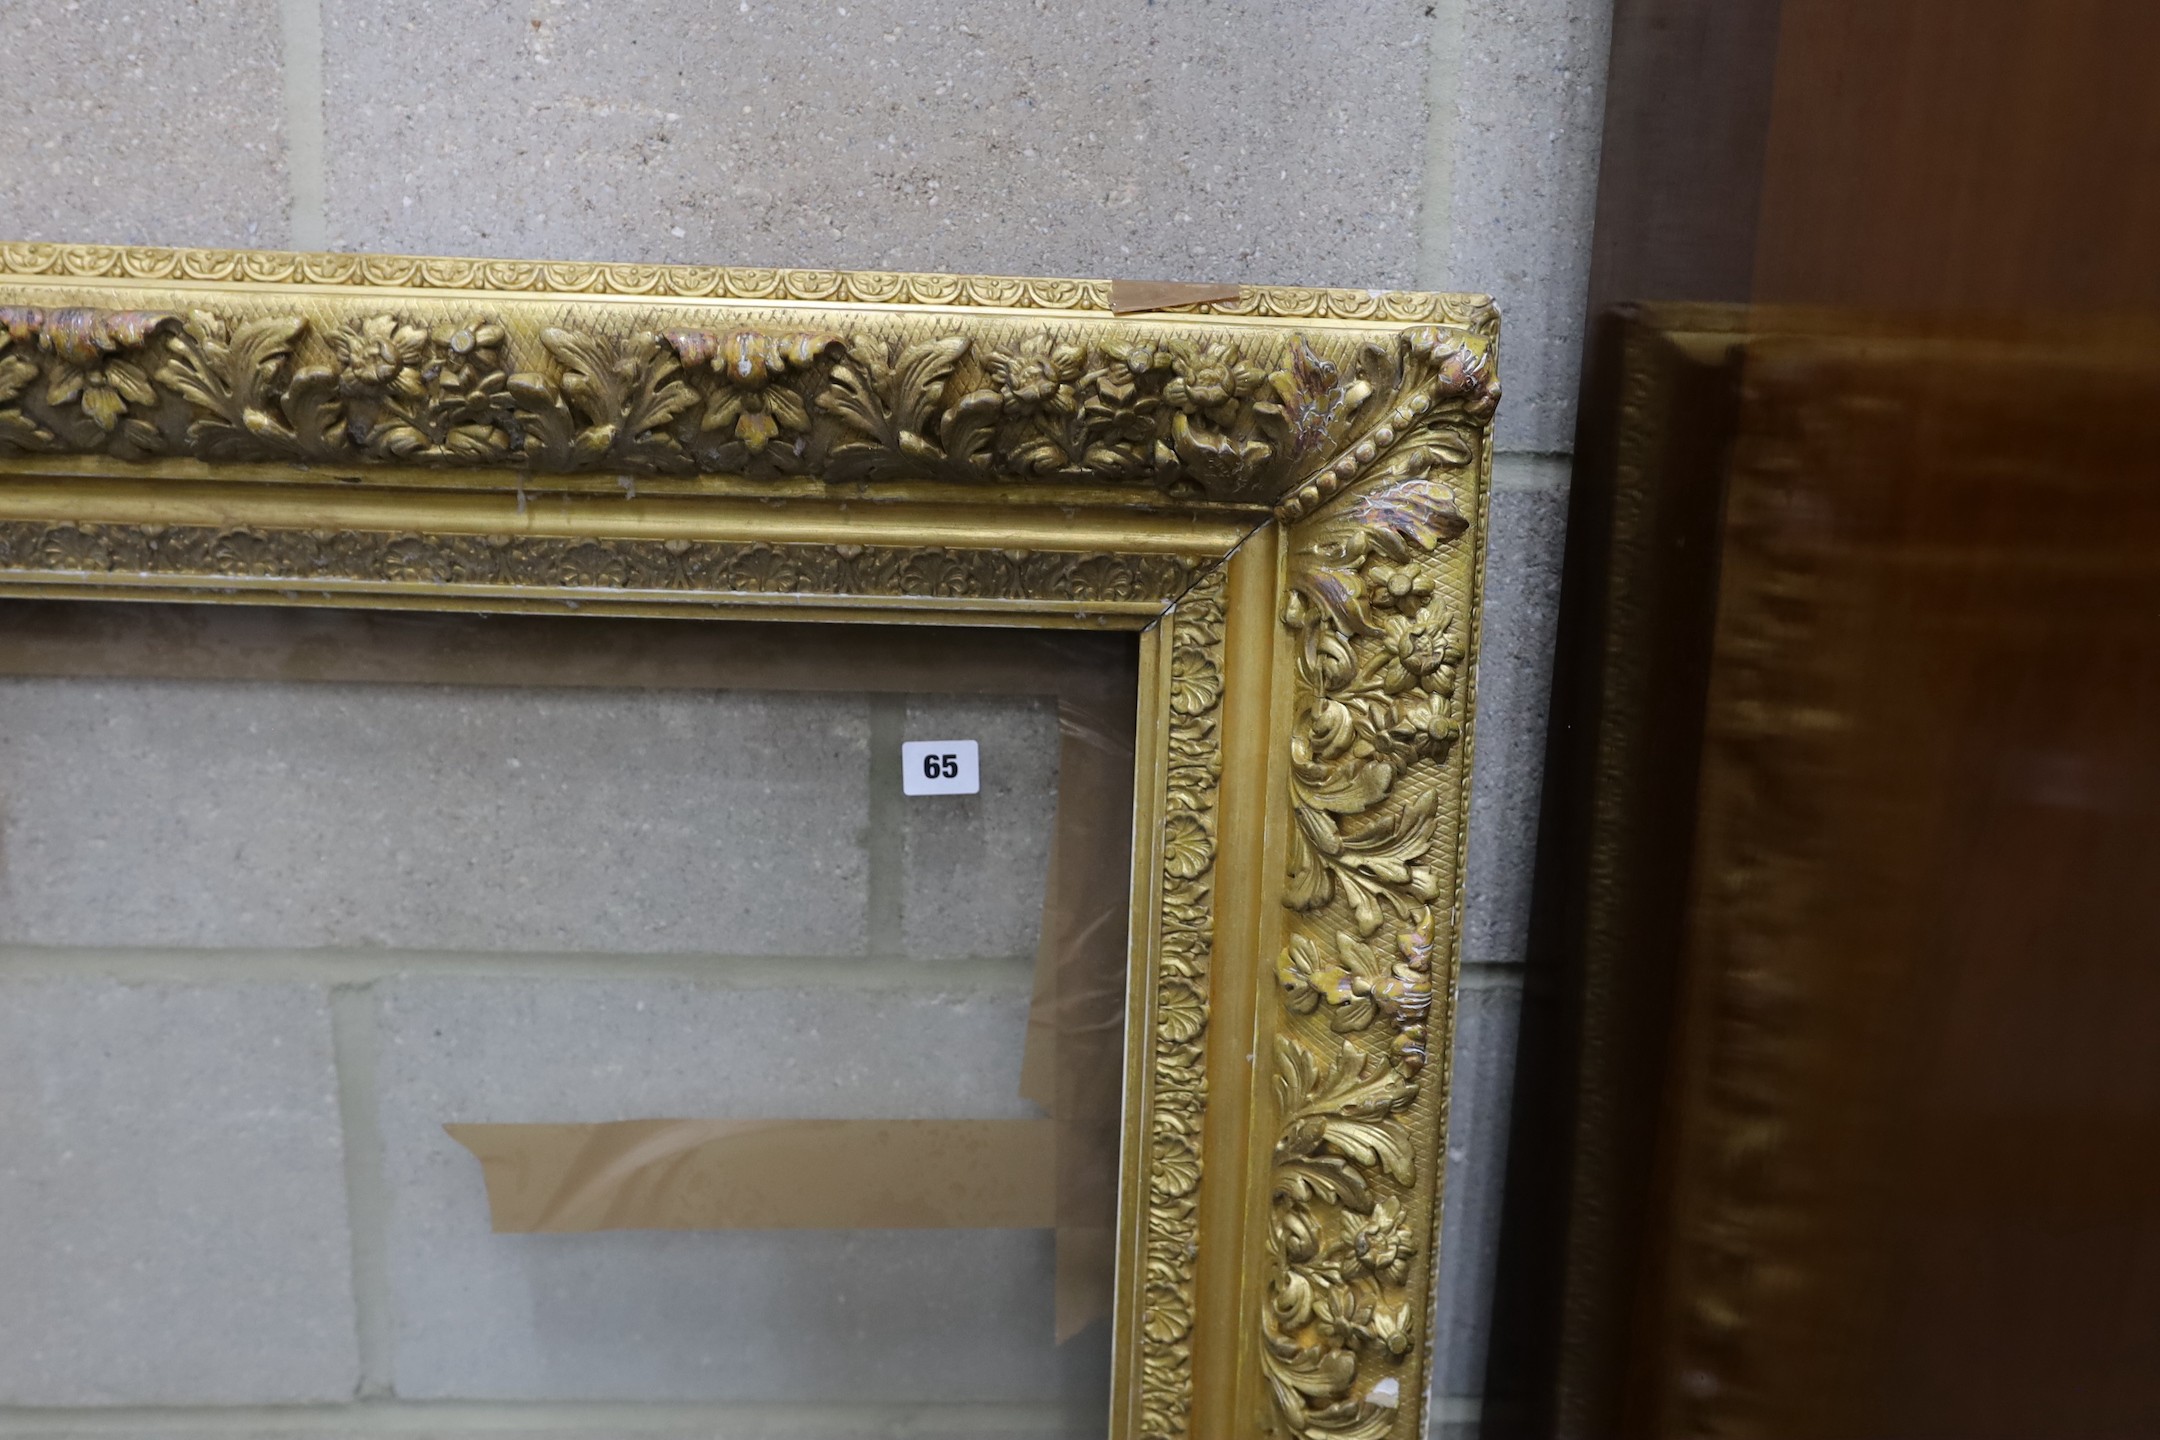 A Victorian rectangular giltwood and gesso picture frame, aperture 75 x 96 cms.